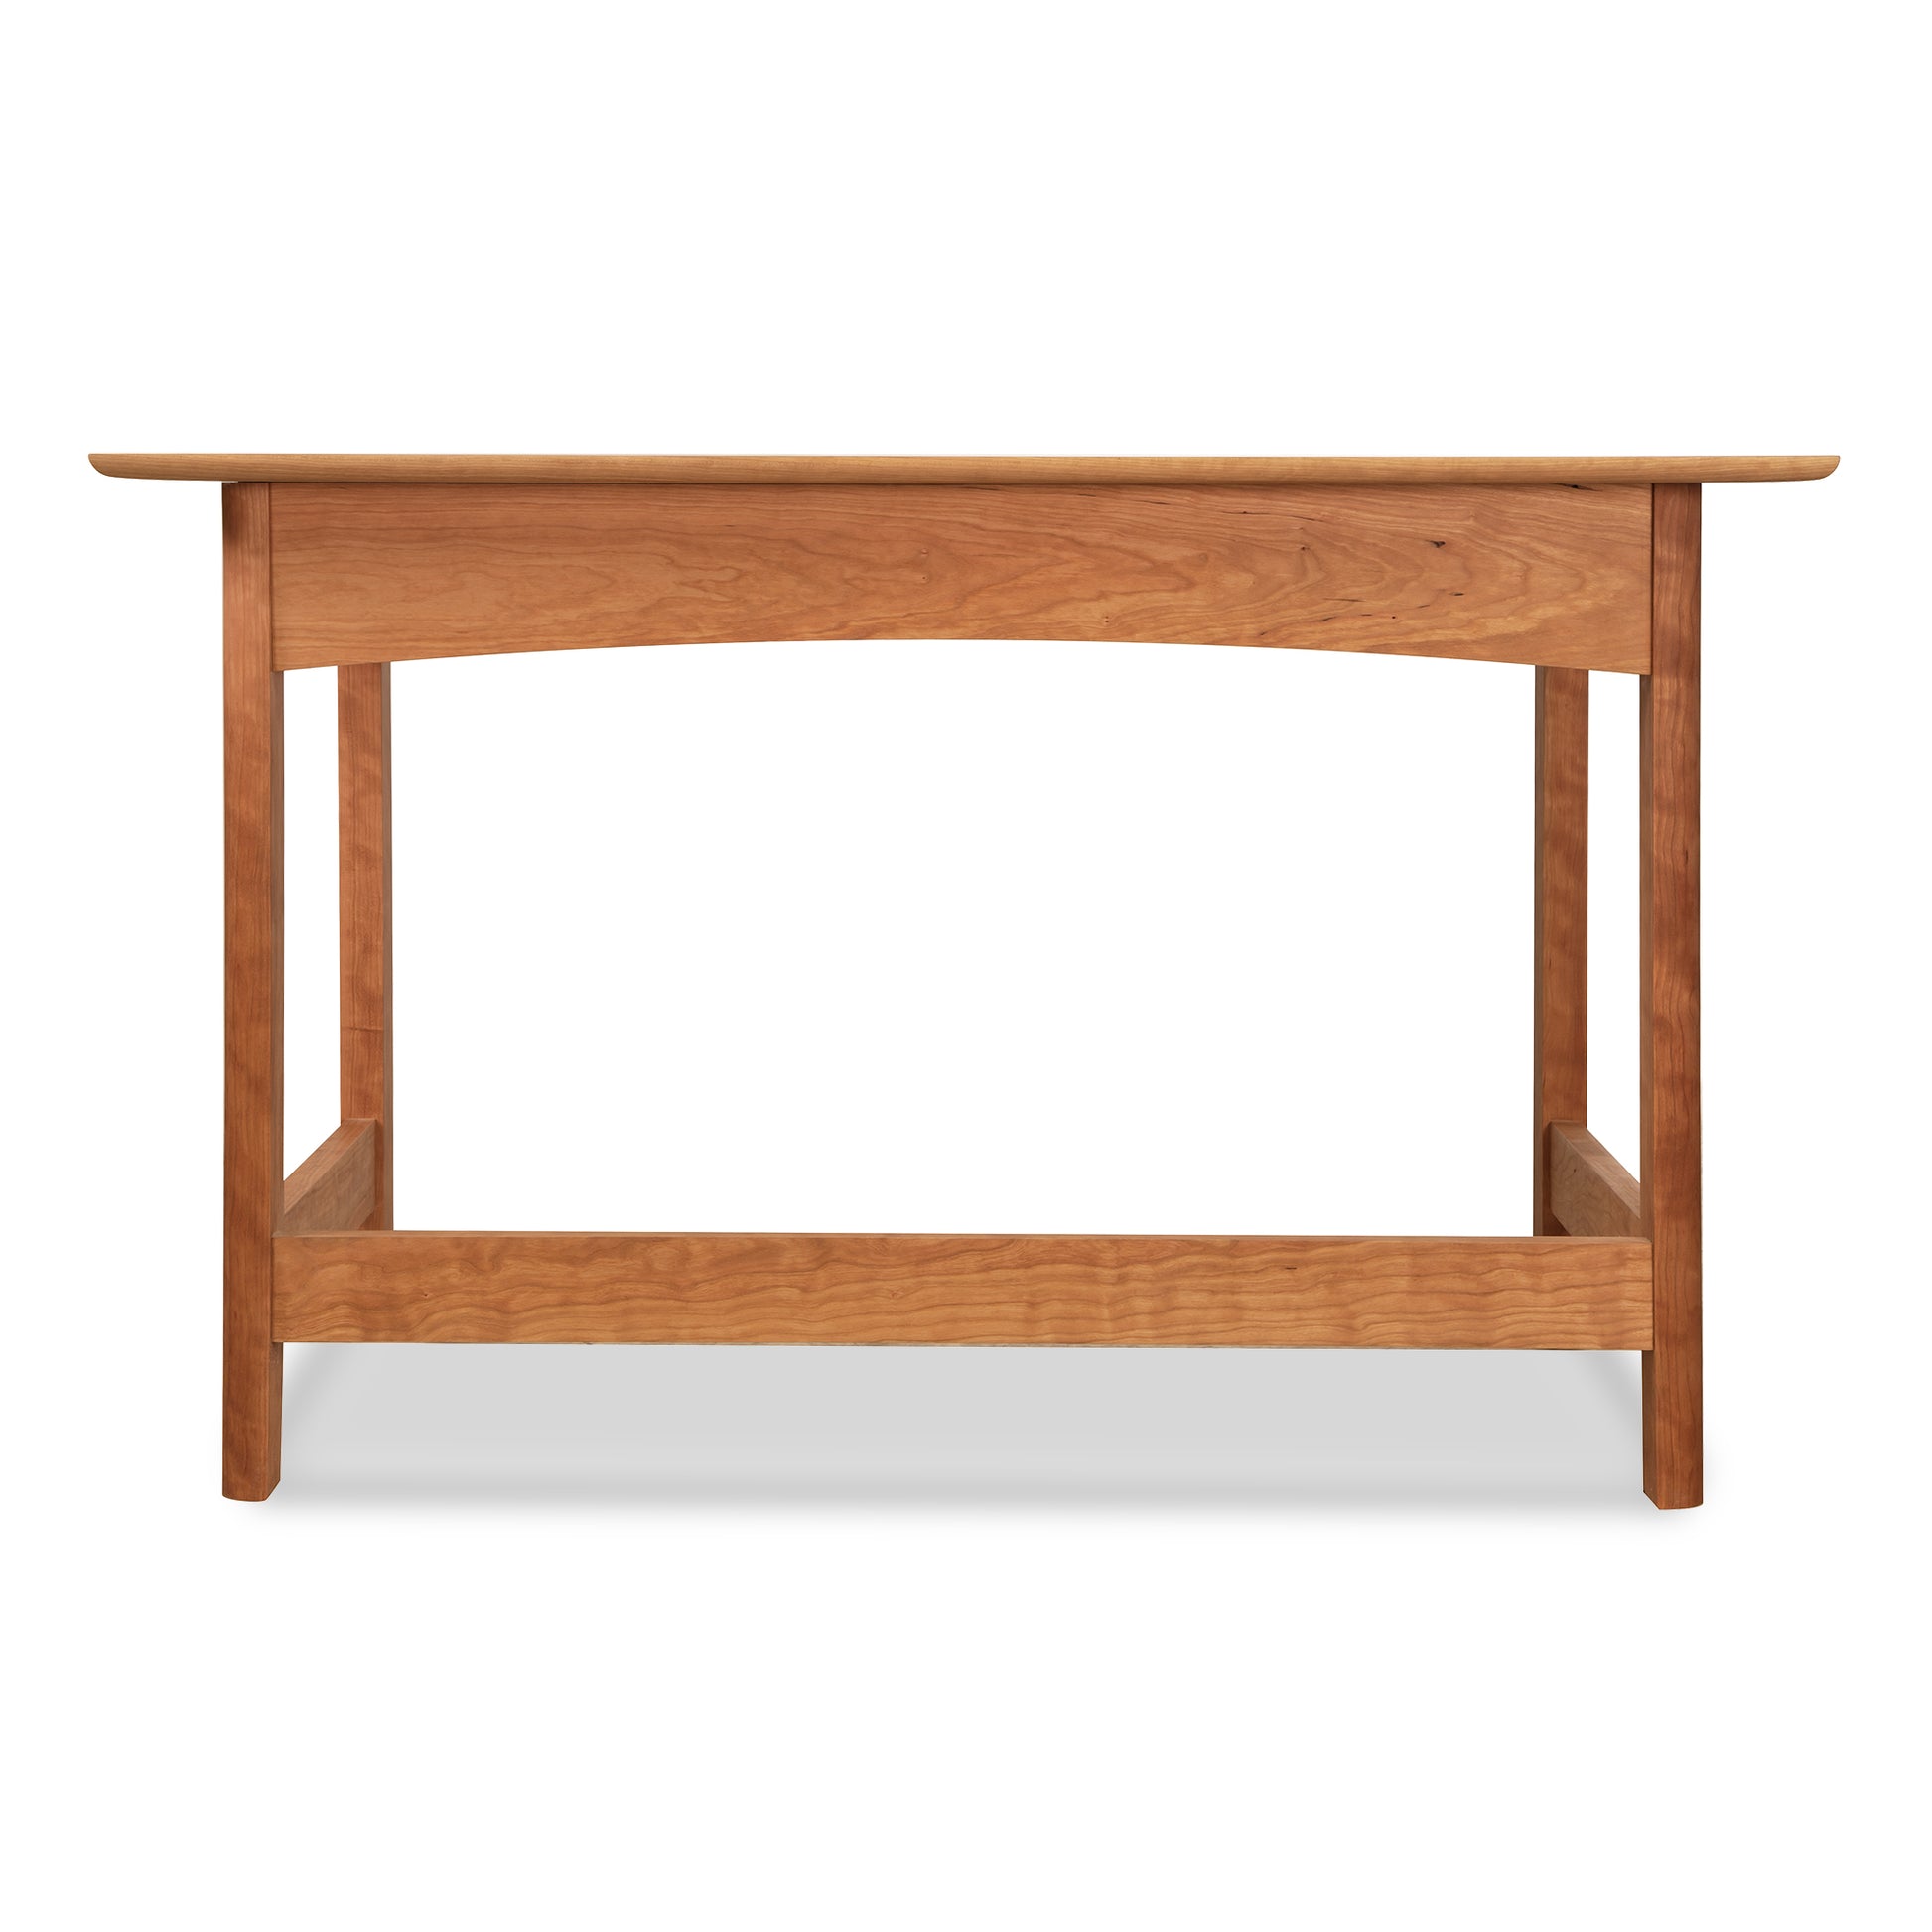 A Heartwood Shaker Writing Desk handcrafted by Vermont Furniture Designs with sustainable cherry wood, a flat top and four legs against a white background.